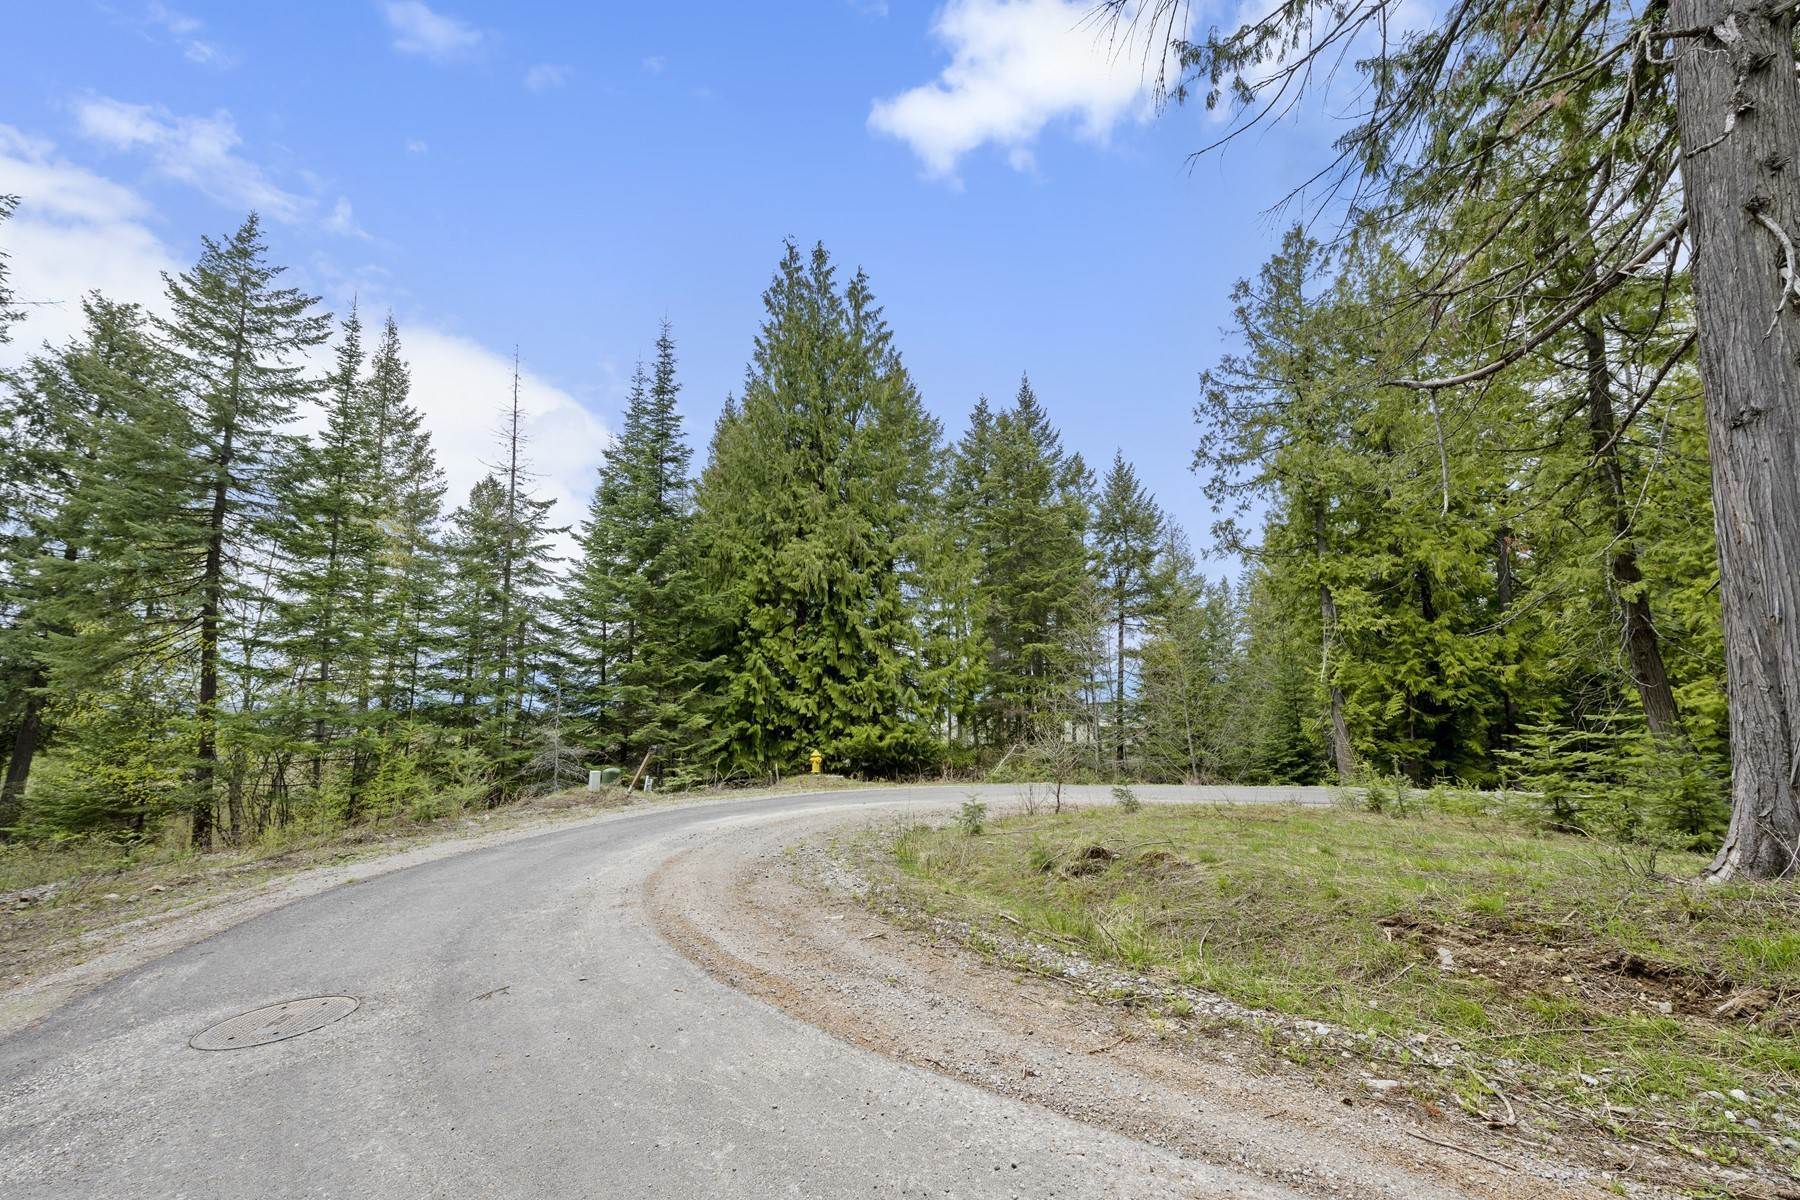 11. Land for Sale at IdahoClubScenicView.com Blk 5 Lots 3 & 4 White Cloud Dr Sandpoint, Idaho 83864 United States